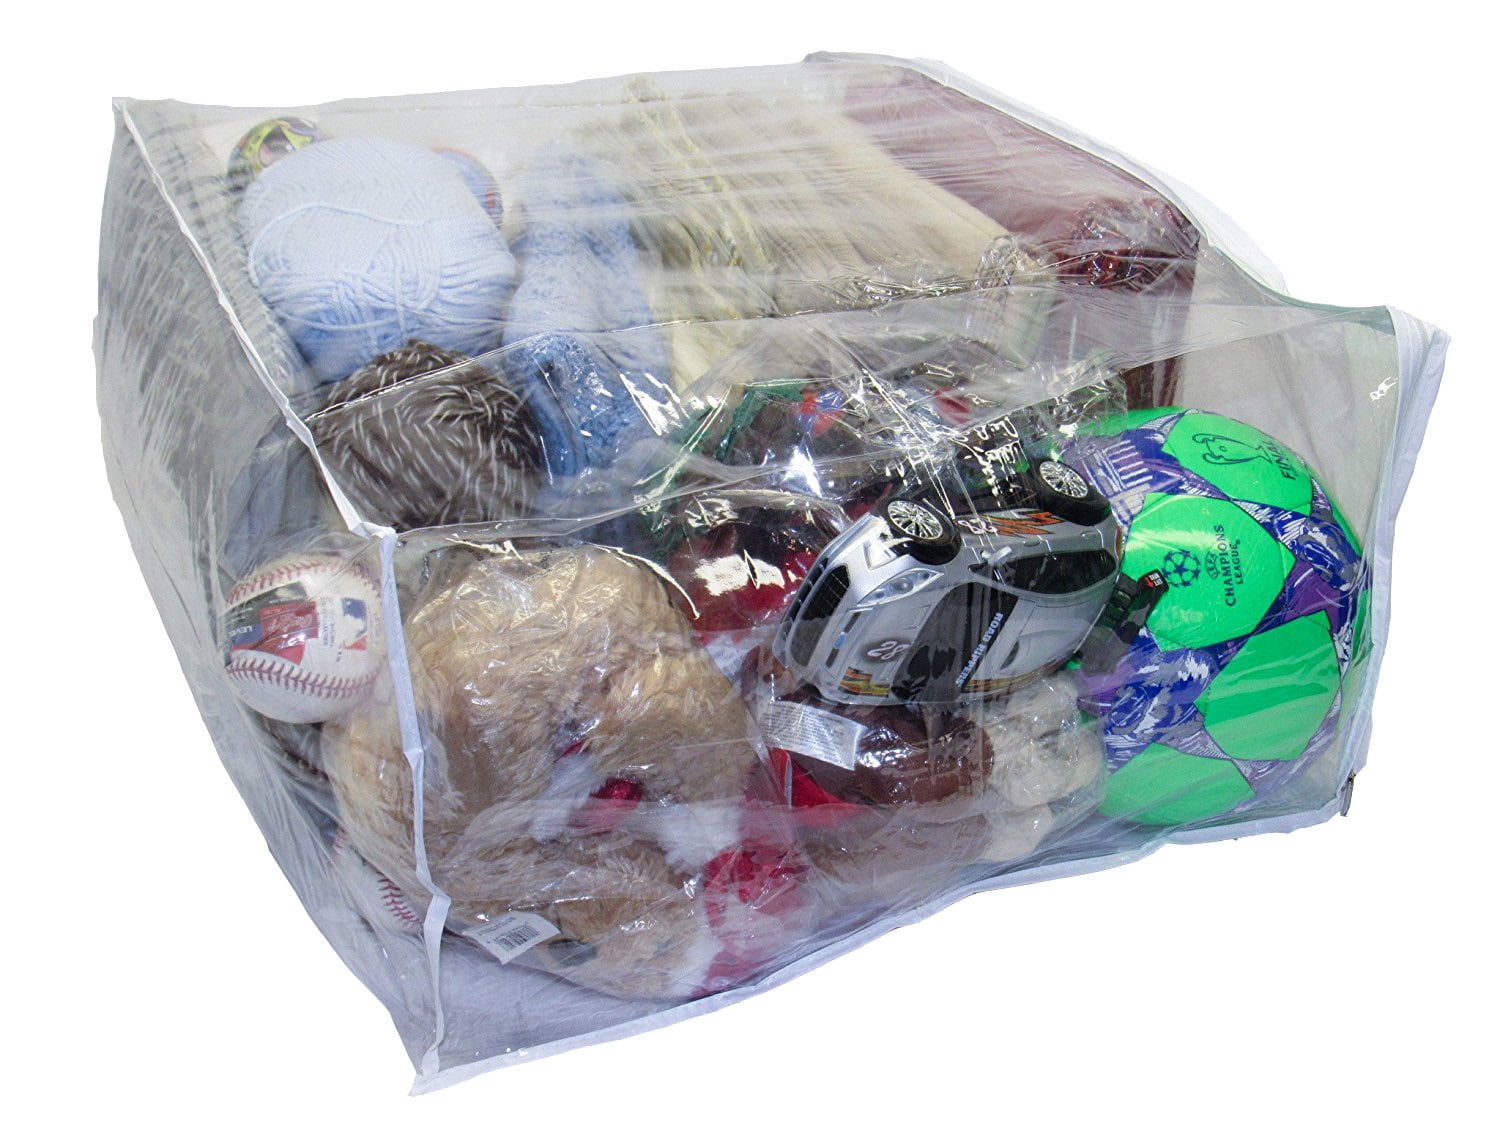  Clear bags for clothes storage, toys, snack bags and